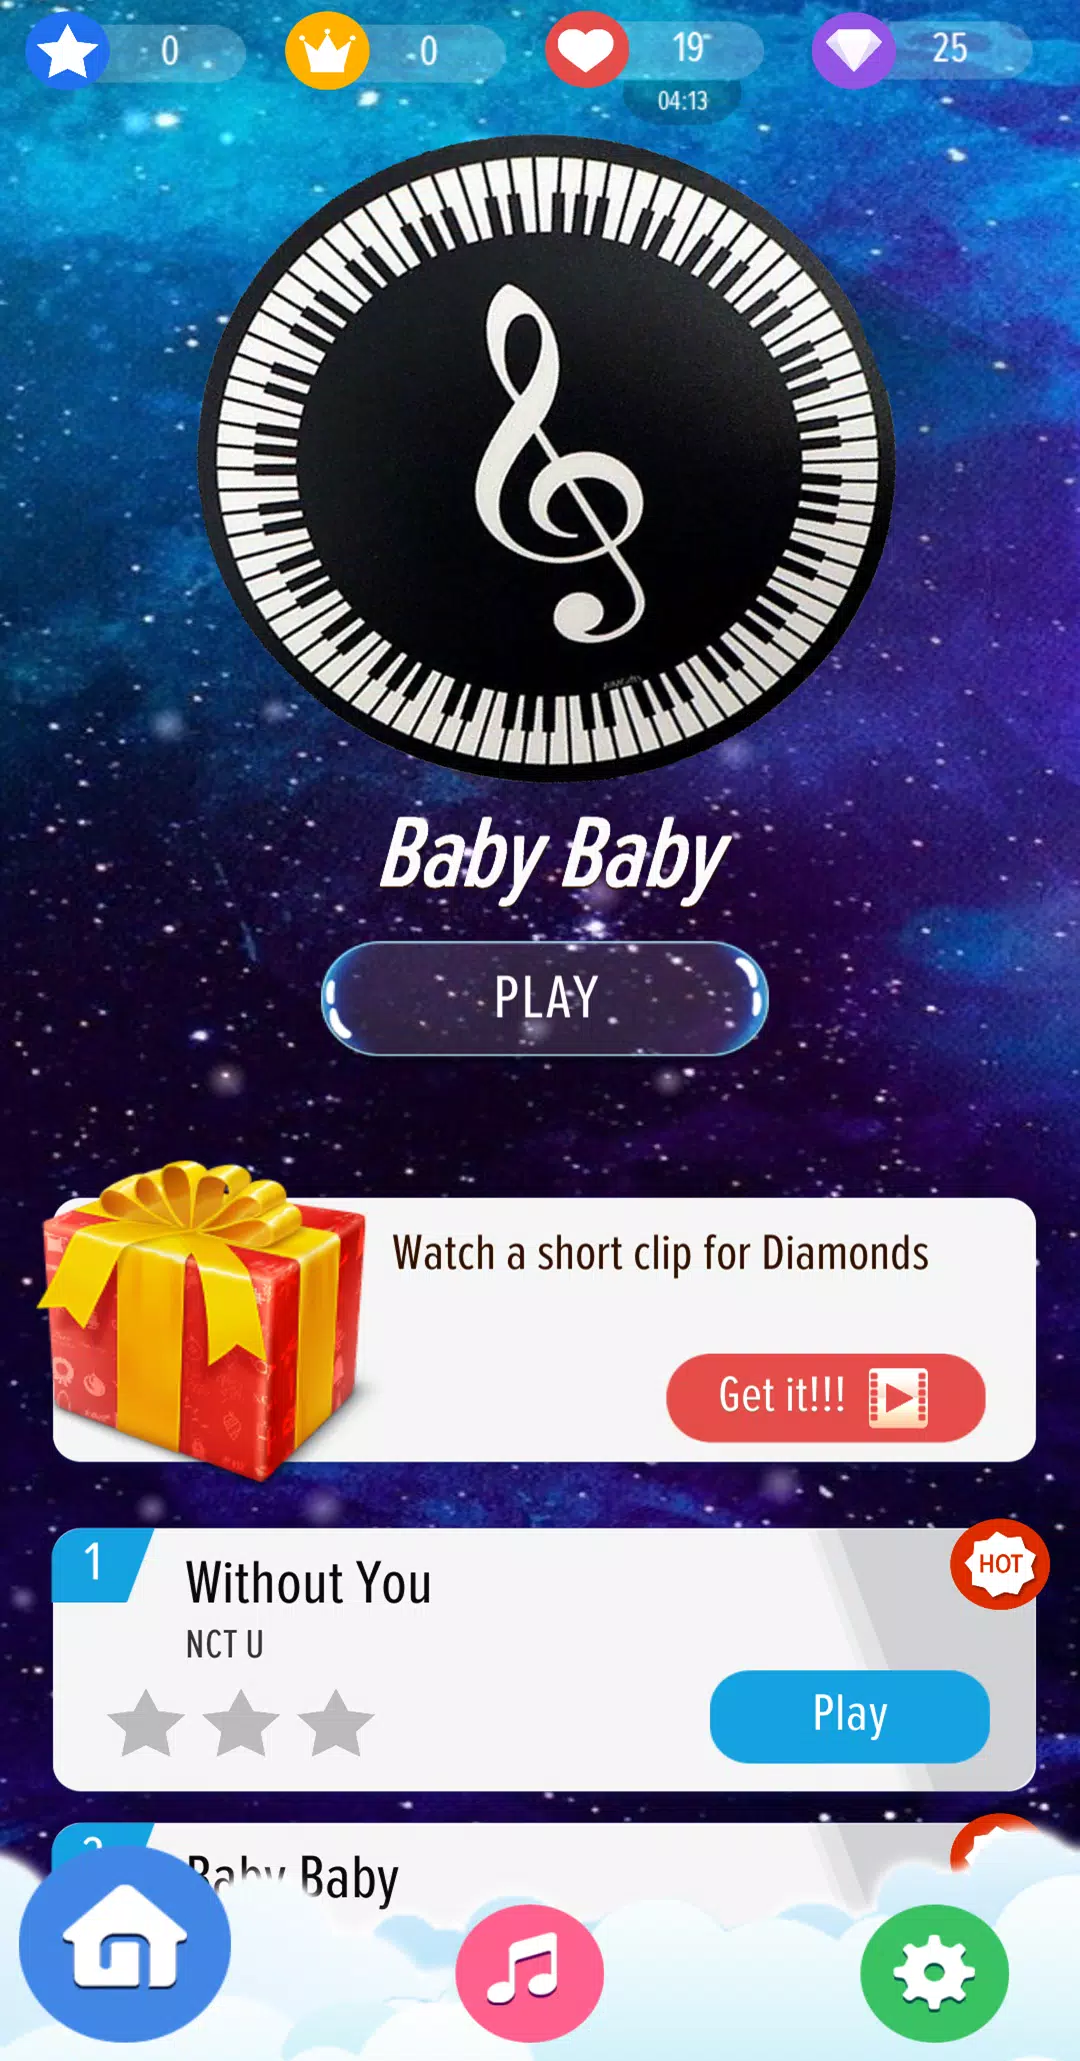 Kpop Piano Magic Tiles Offline - All Korean Song for Android - APK Download